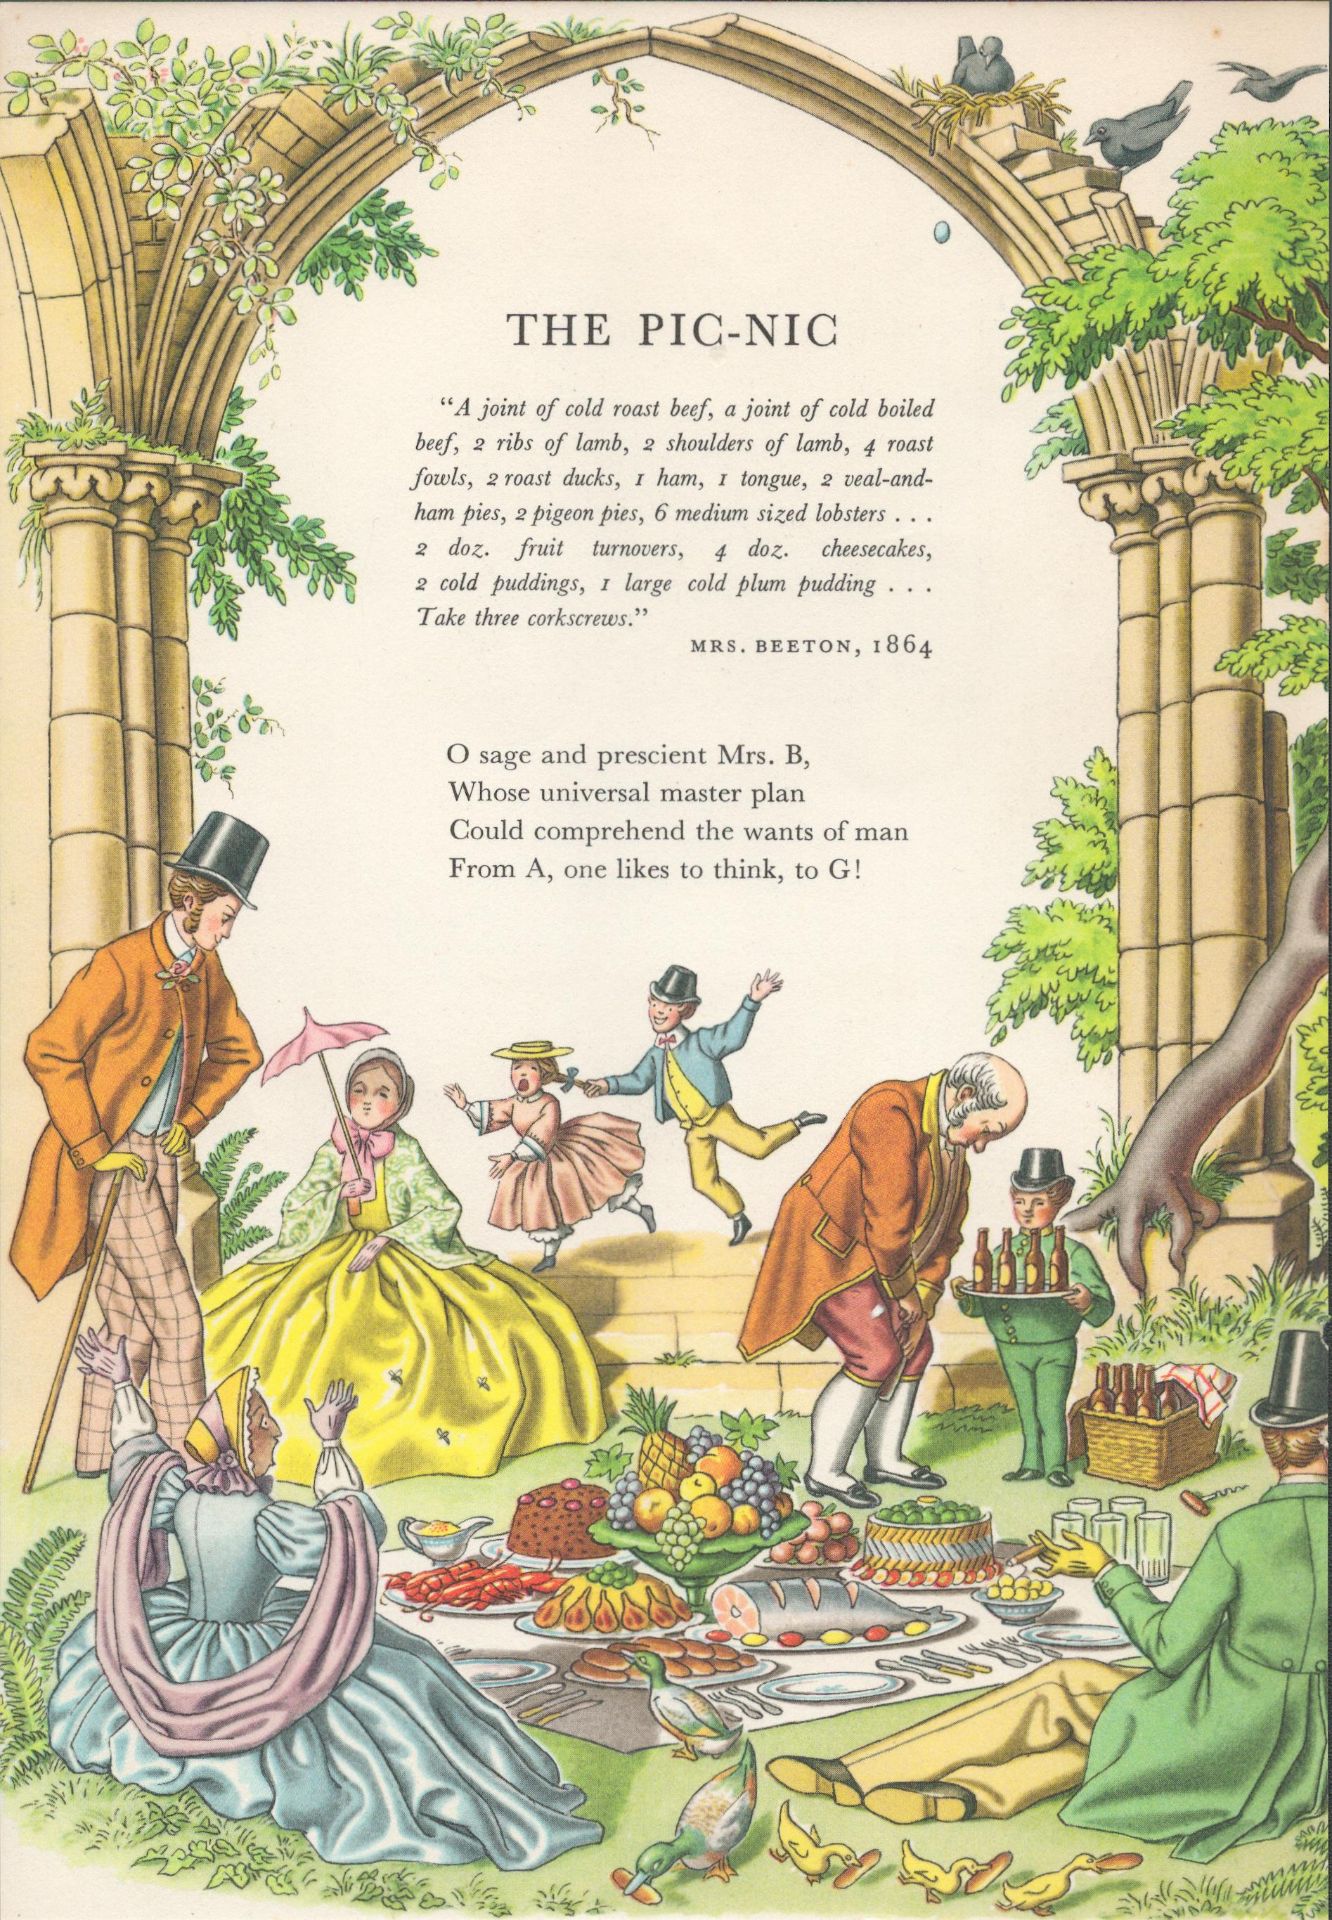 67 Years Old Guinness Double Sided Print """"The Valet & The Picnic"""" - Image 2 of 2